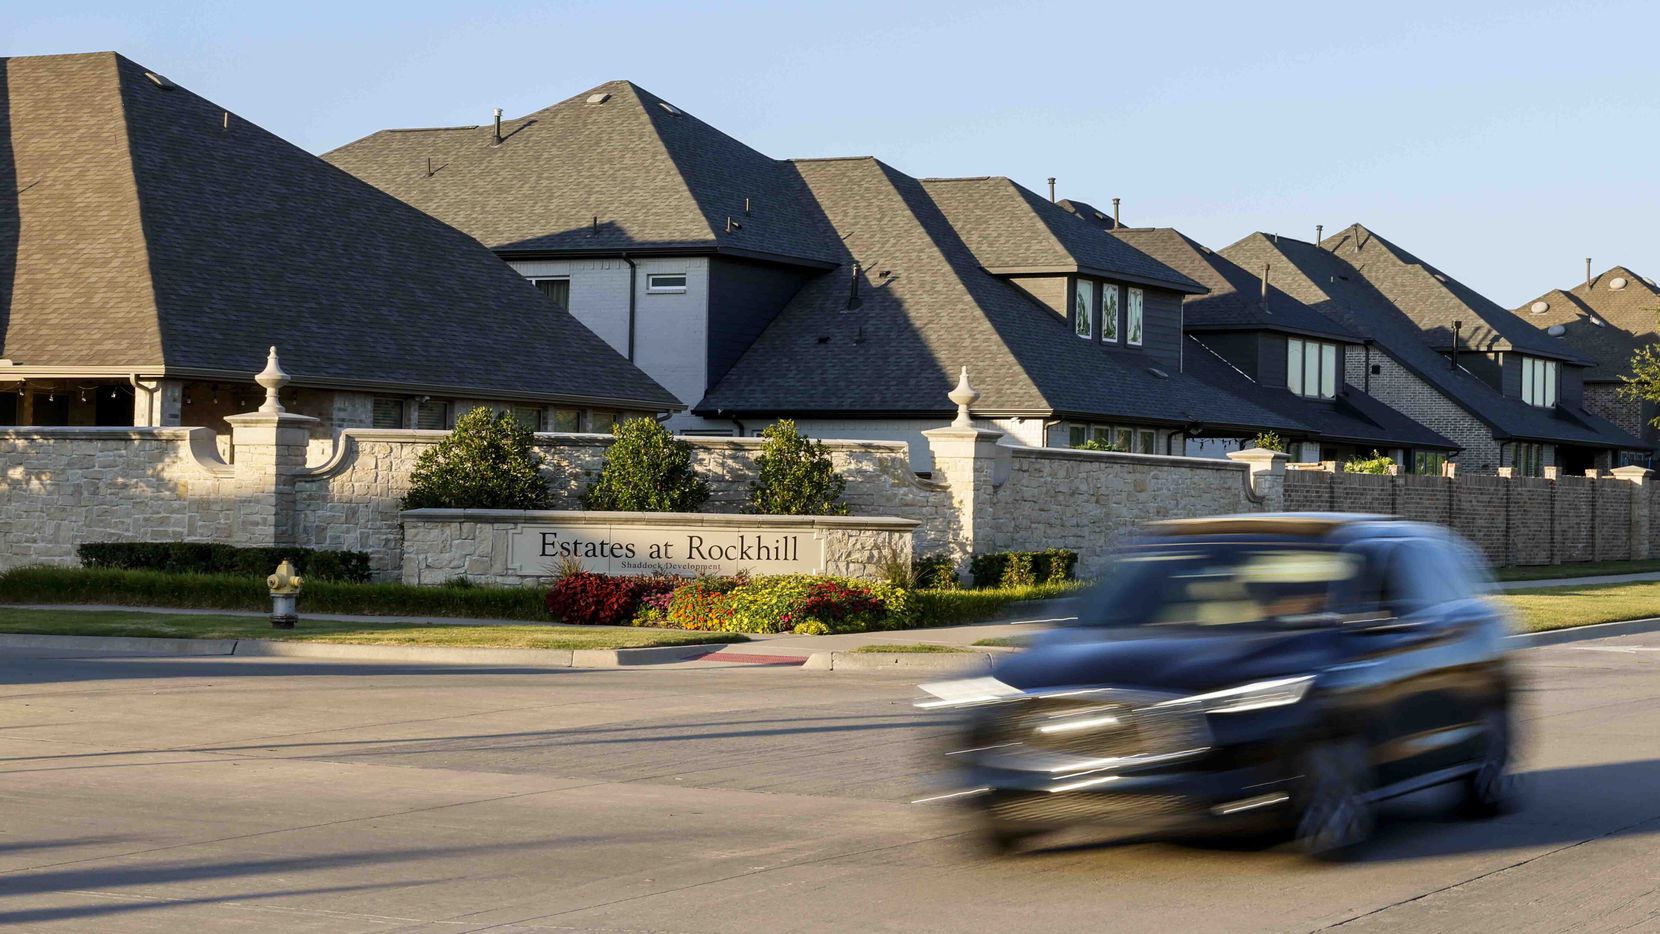 Traffic passes by the front entrance of the Estates at Rockhill on June 29, 2022. The...